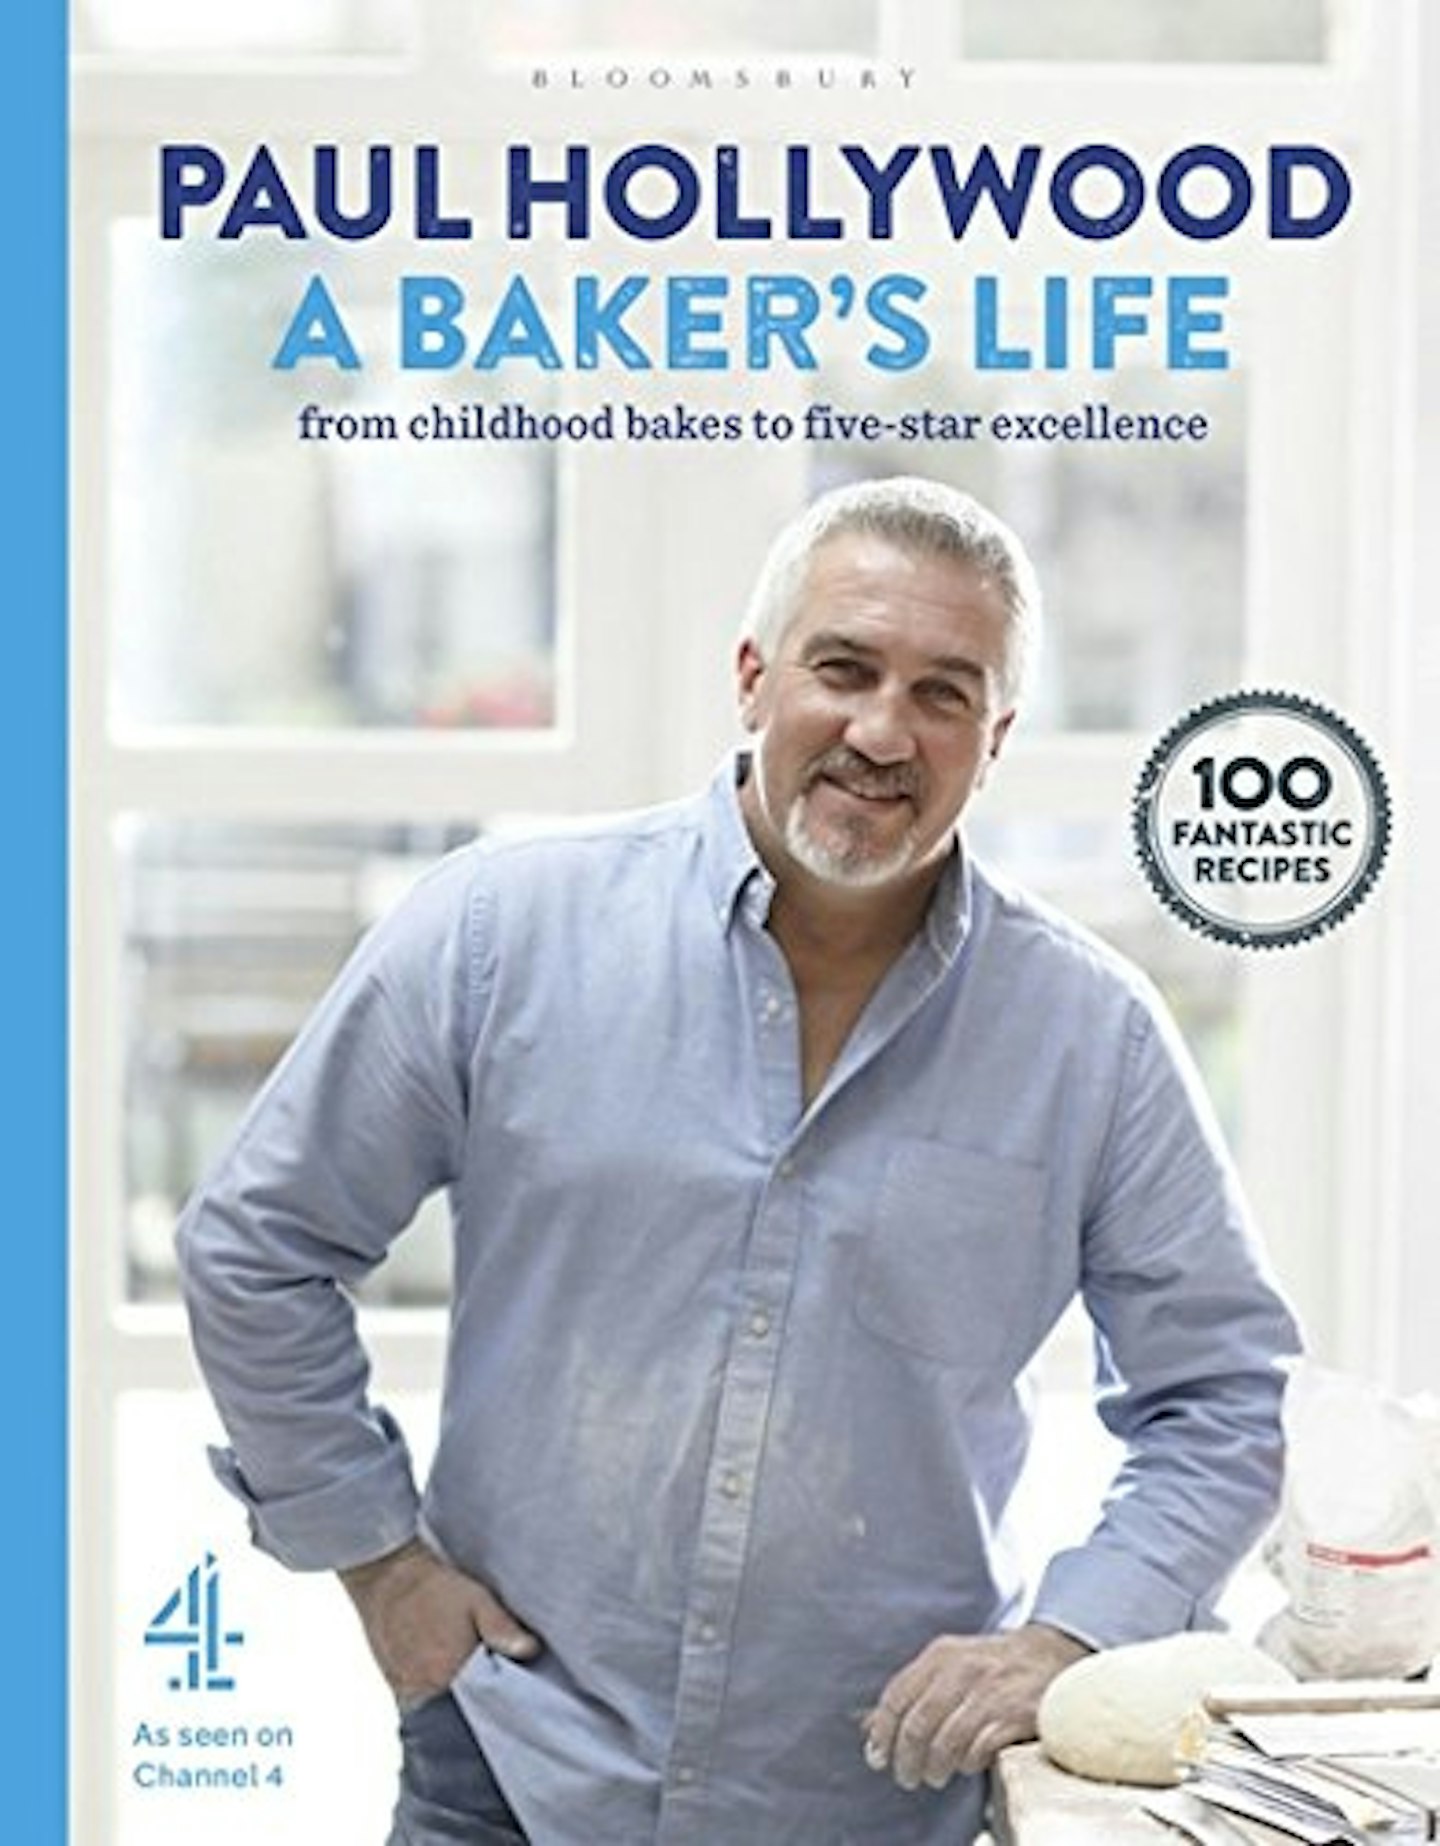 A Baker's Life: 100 fantastic recipes, from childhood bakes to five-star excellence, 7.00